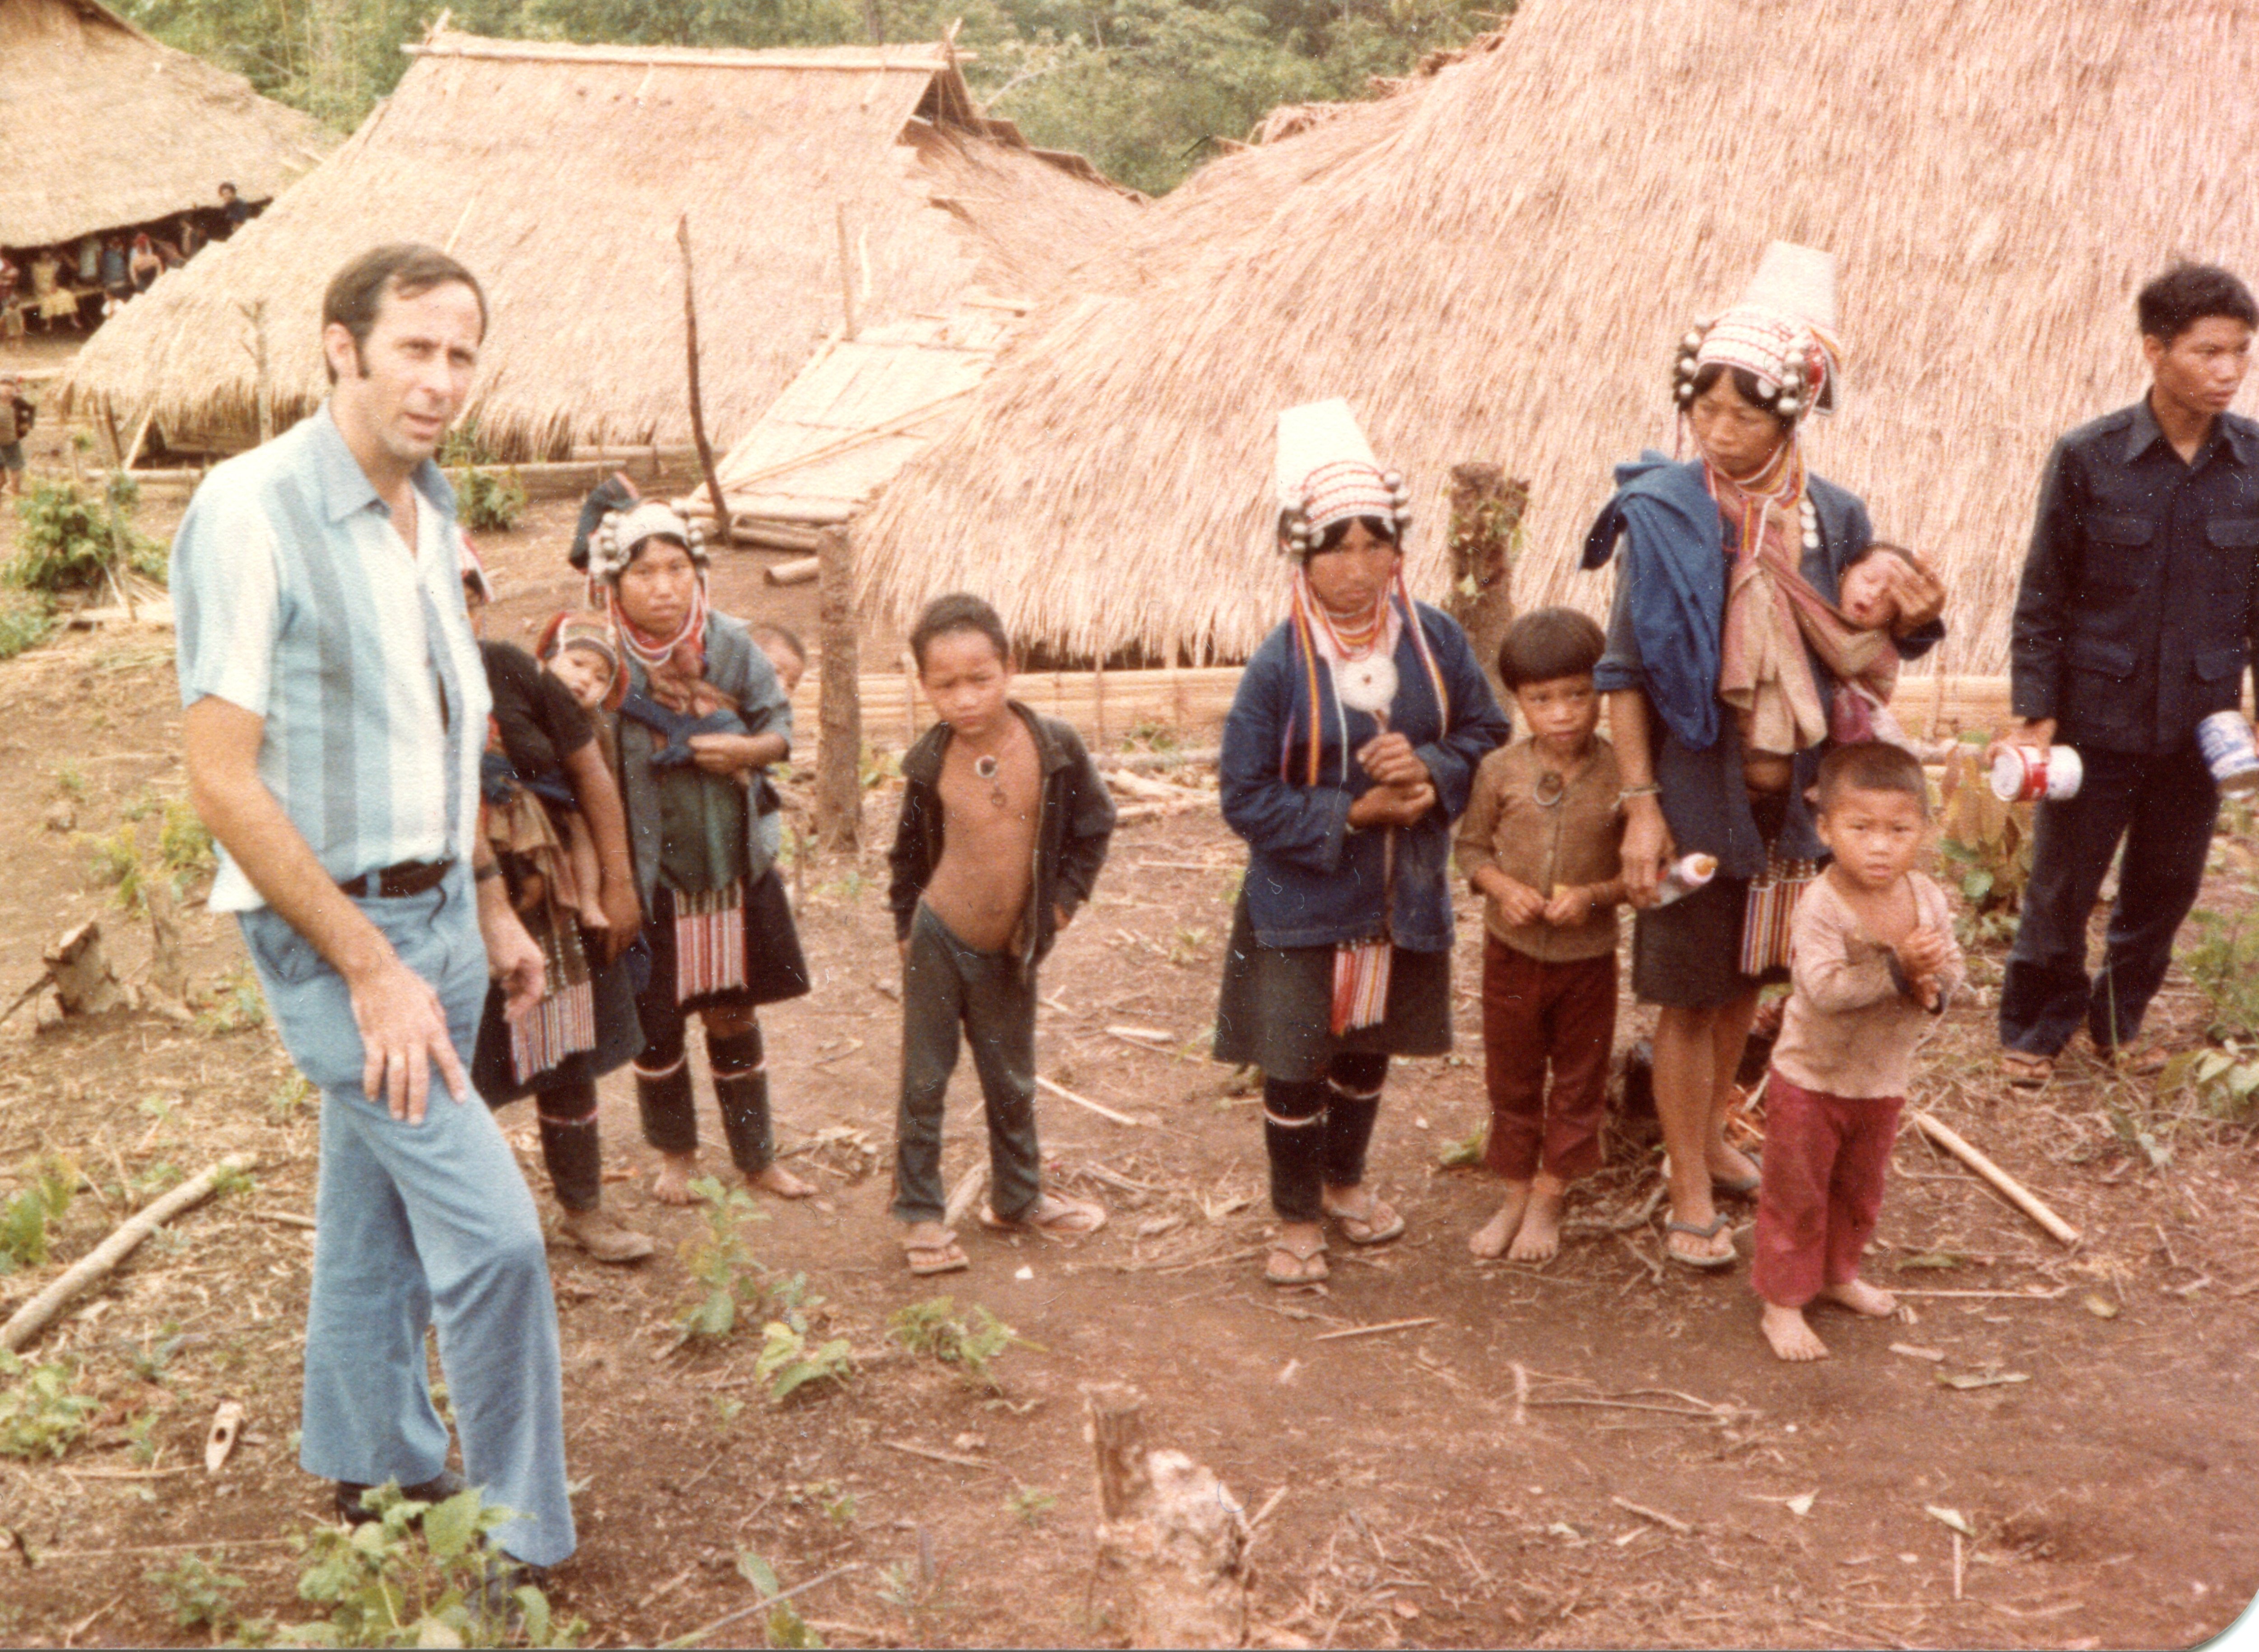 phillip-with-hmong-refugees-in-ban-vinai-camp-thailand188